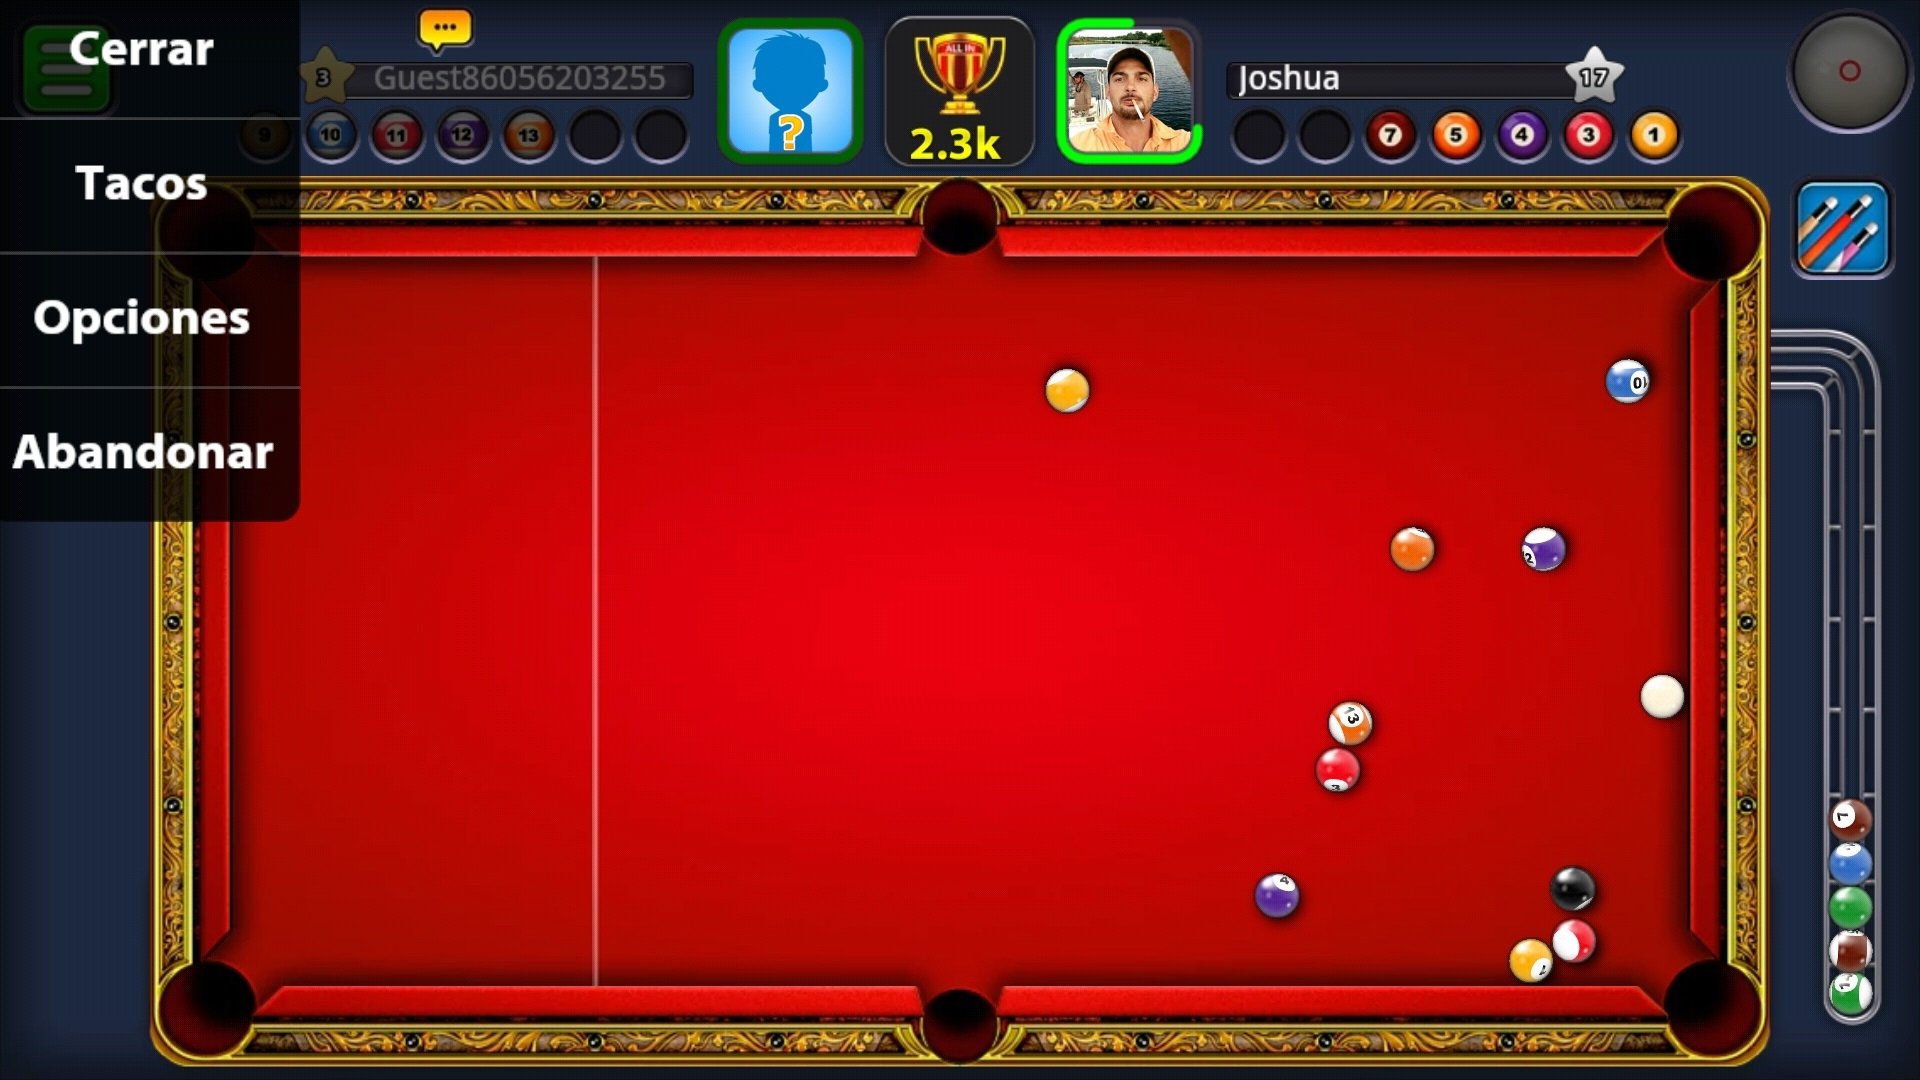 8 Ball Pool 4.5.2 - Download for Android APK Free - 